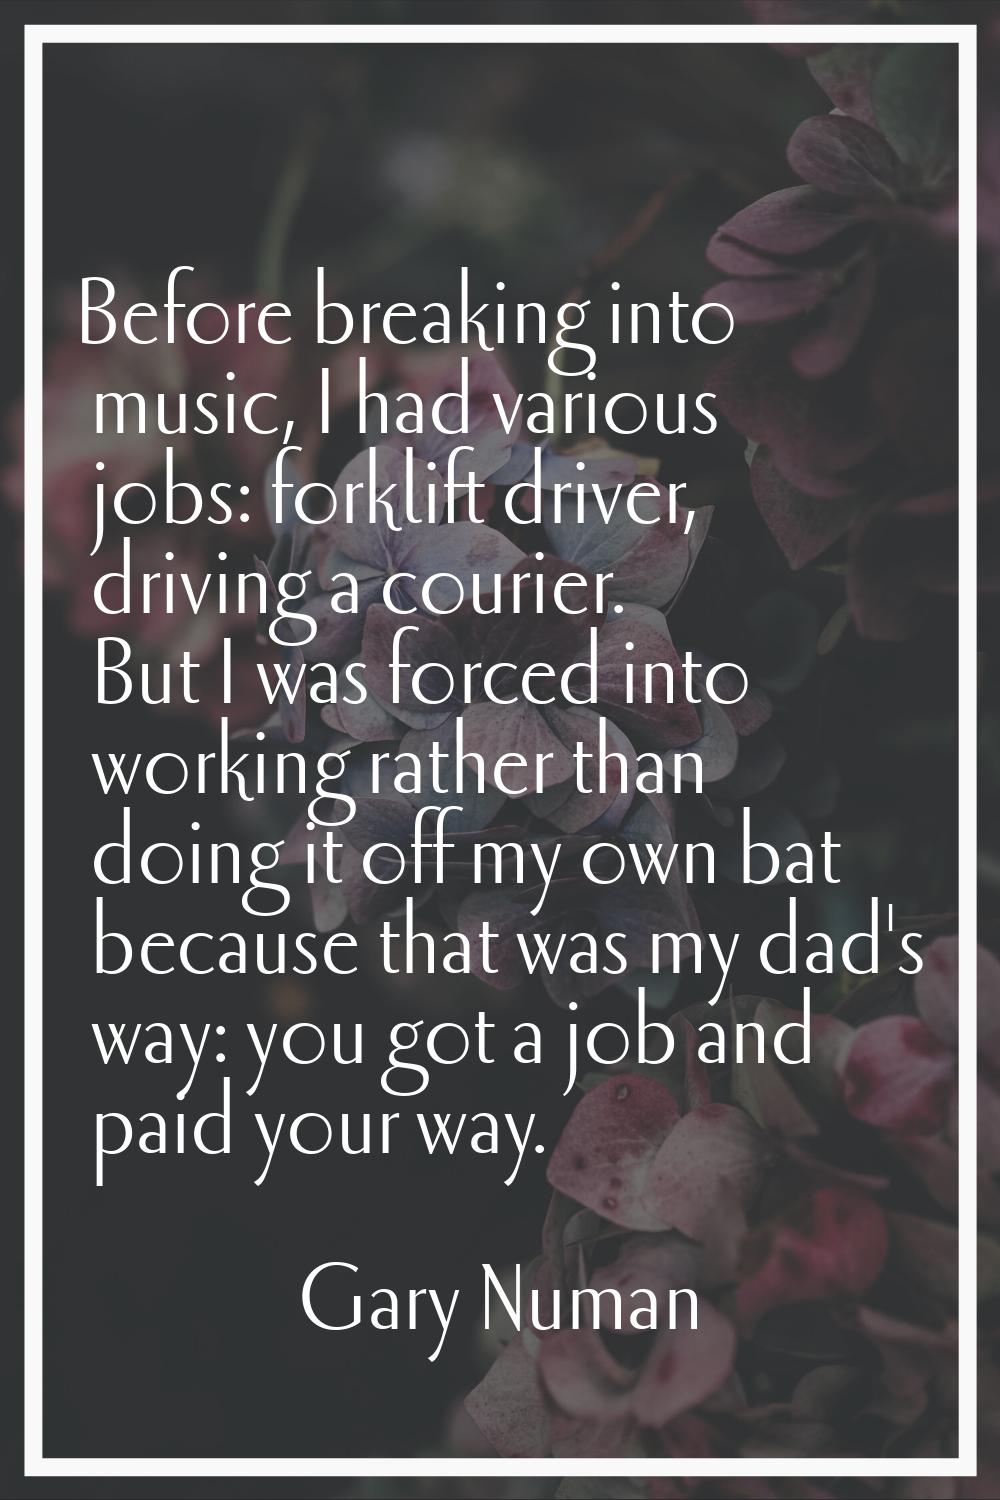 Before breaking into music, I had various jobs: forklift driver, driving a courier. But I was force